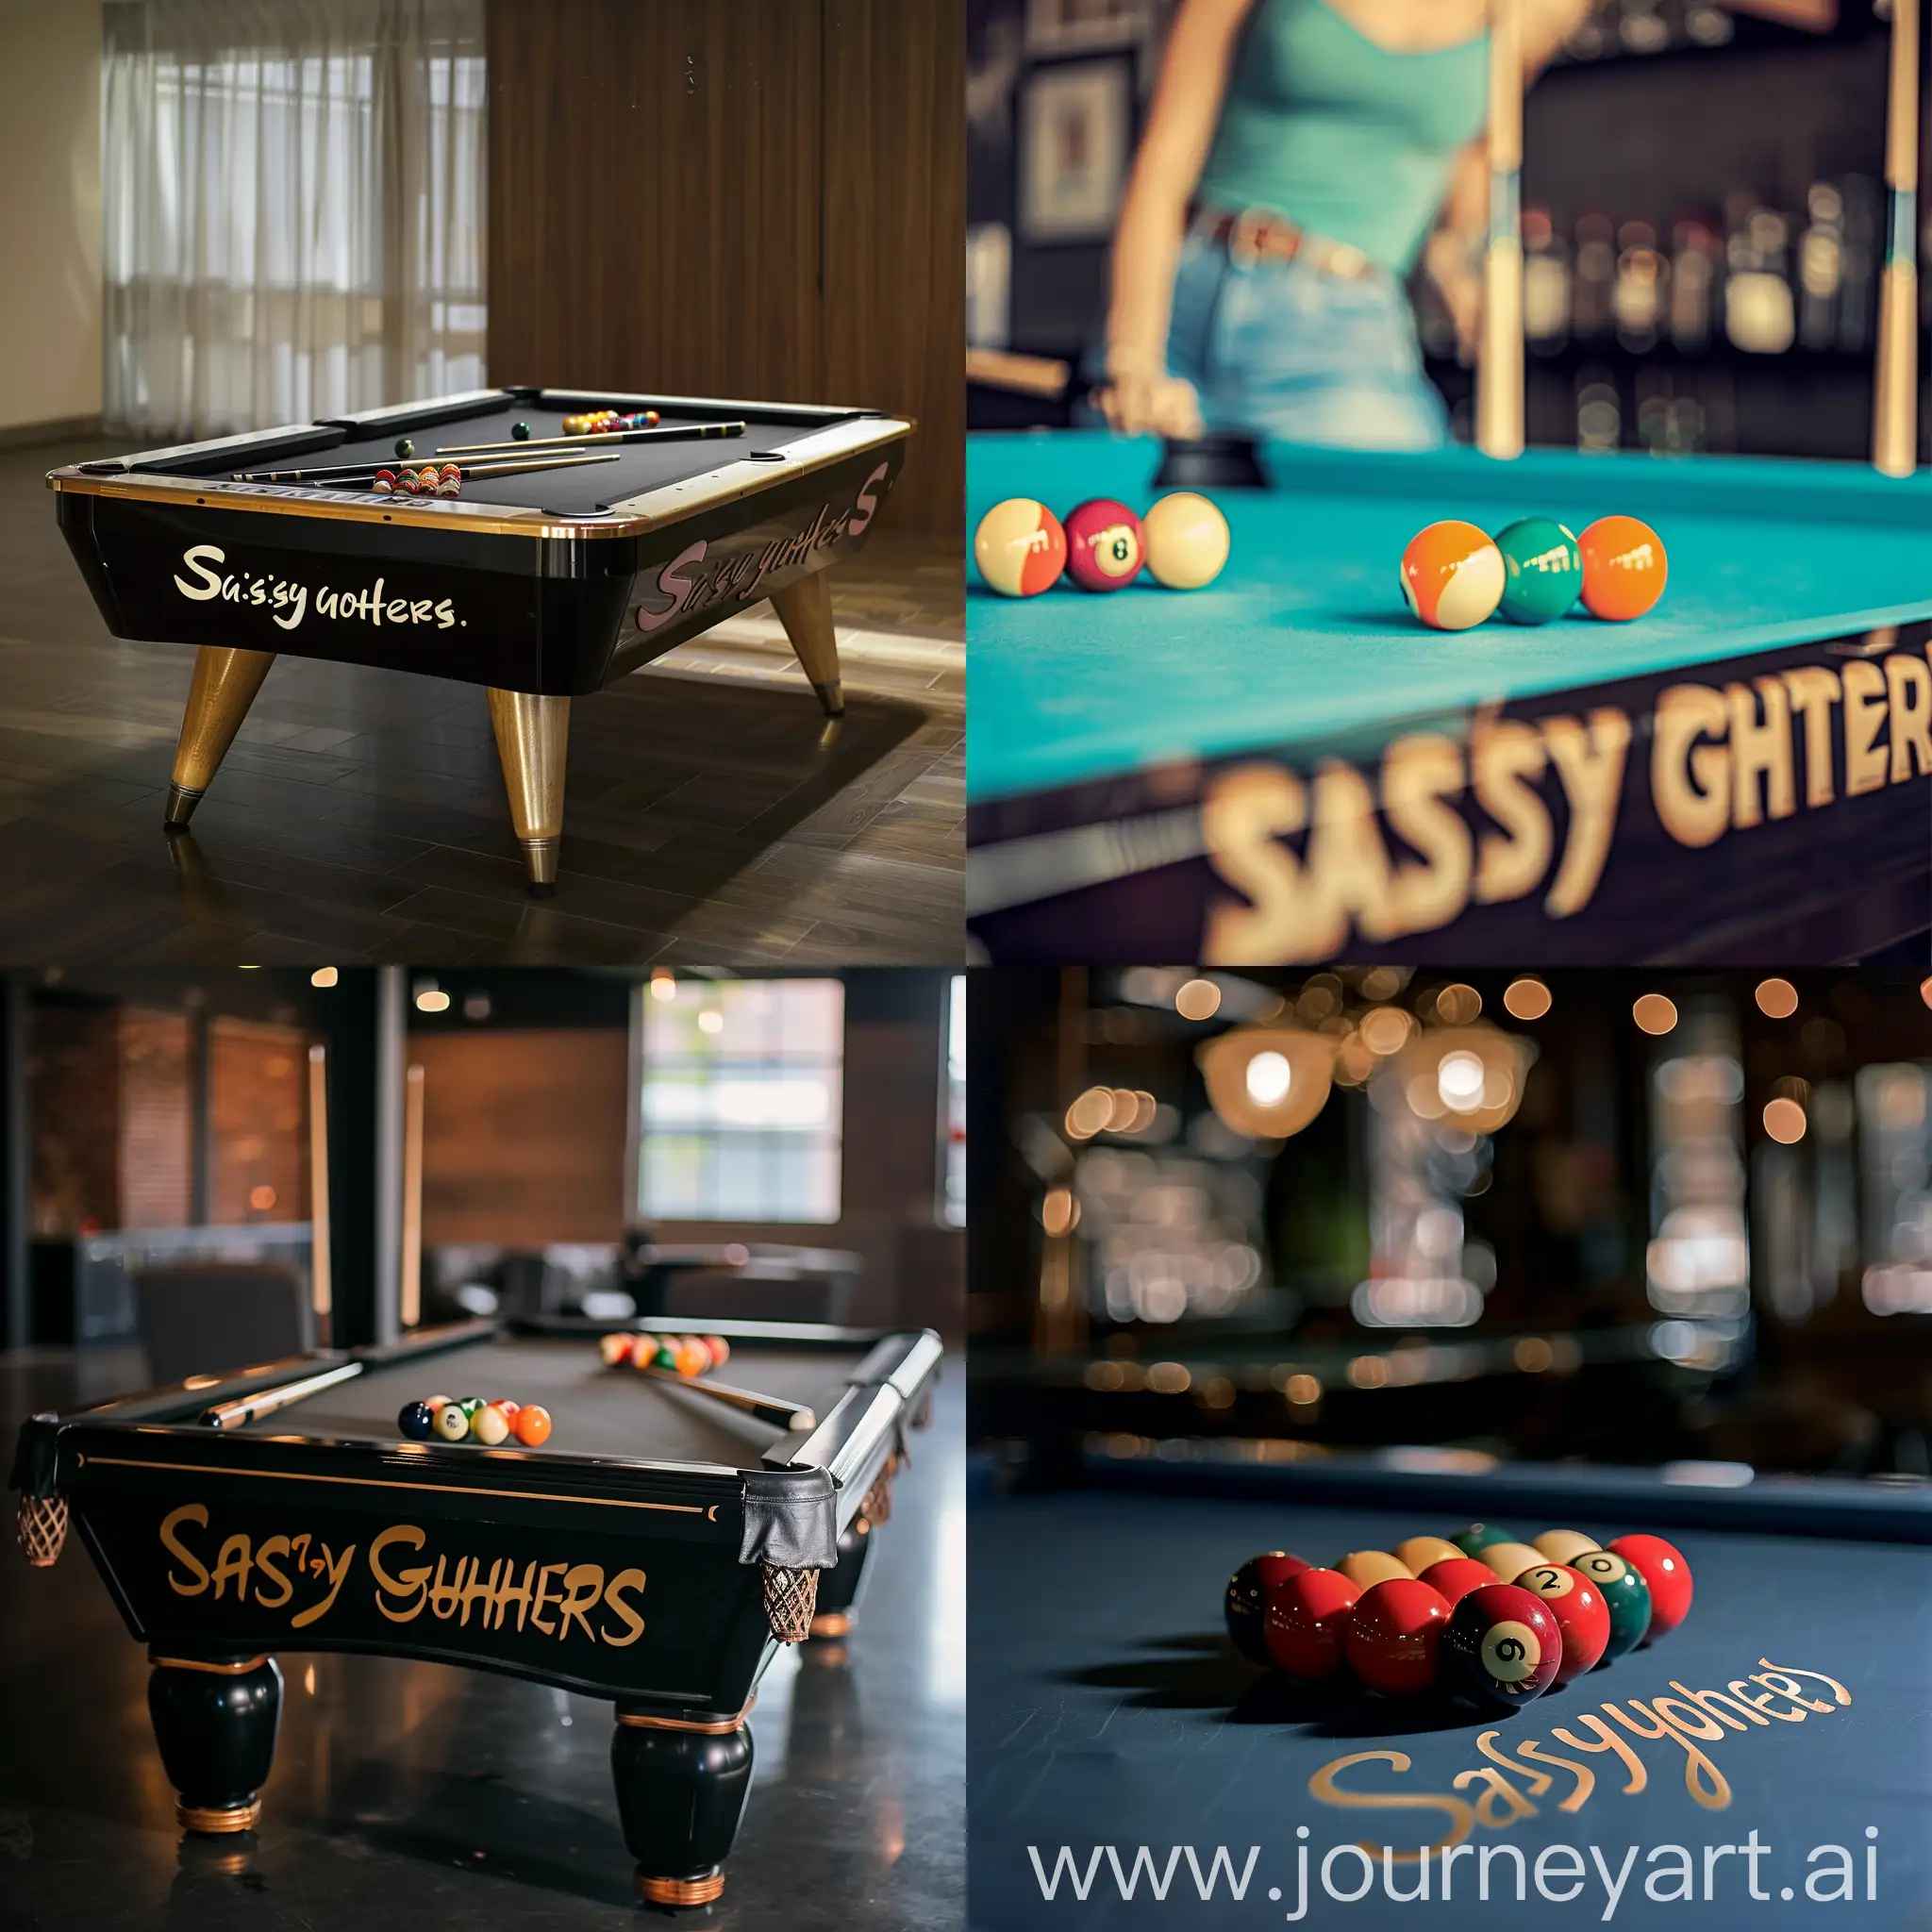 Vibrant-Sassy-Shooters-Pool-Table-with-a-Playful-Atmosphere